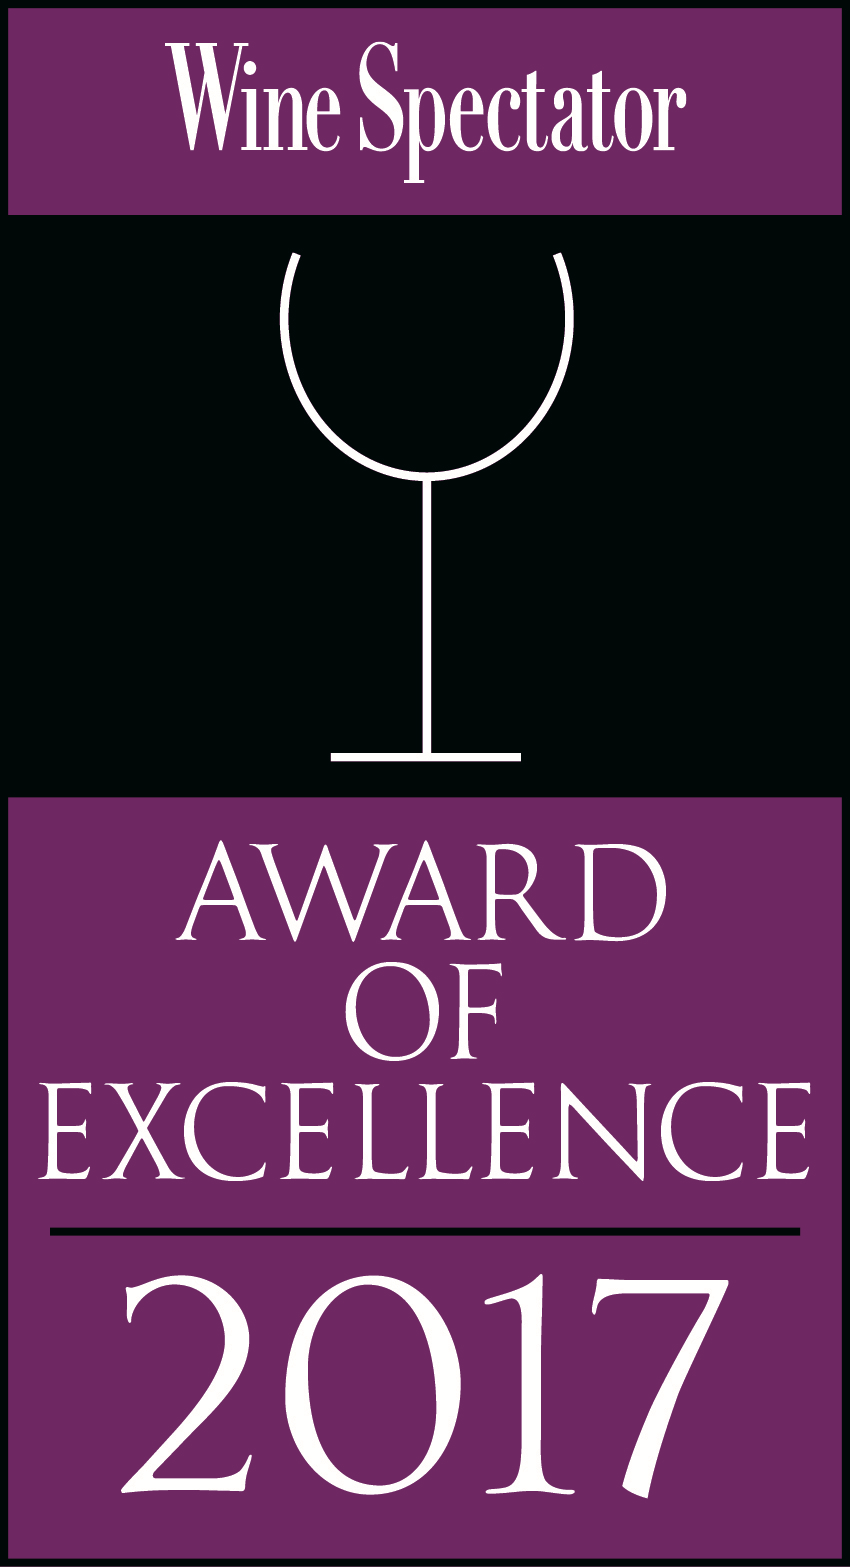 Wine Spectator Award of Excellence 2017